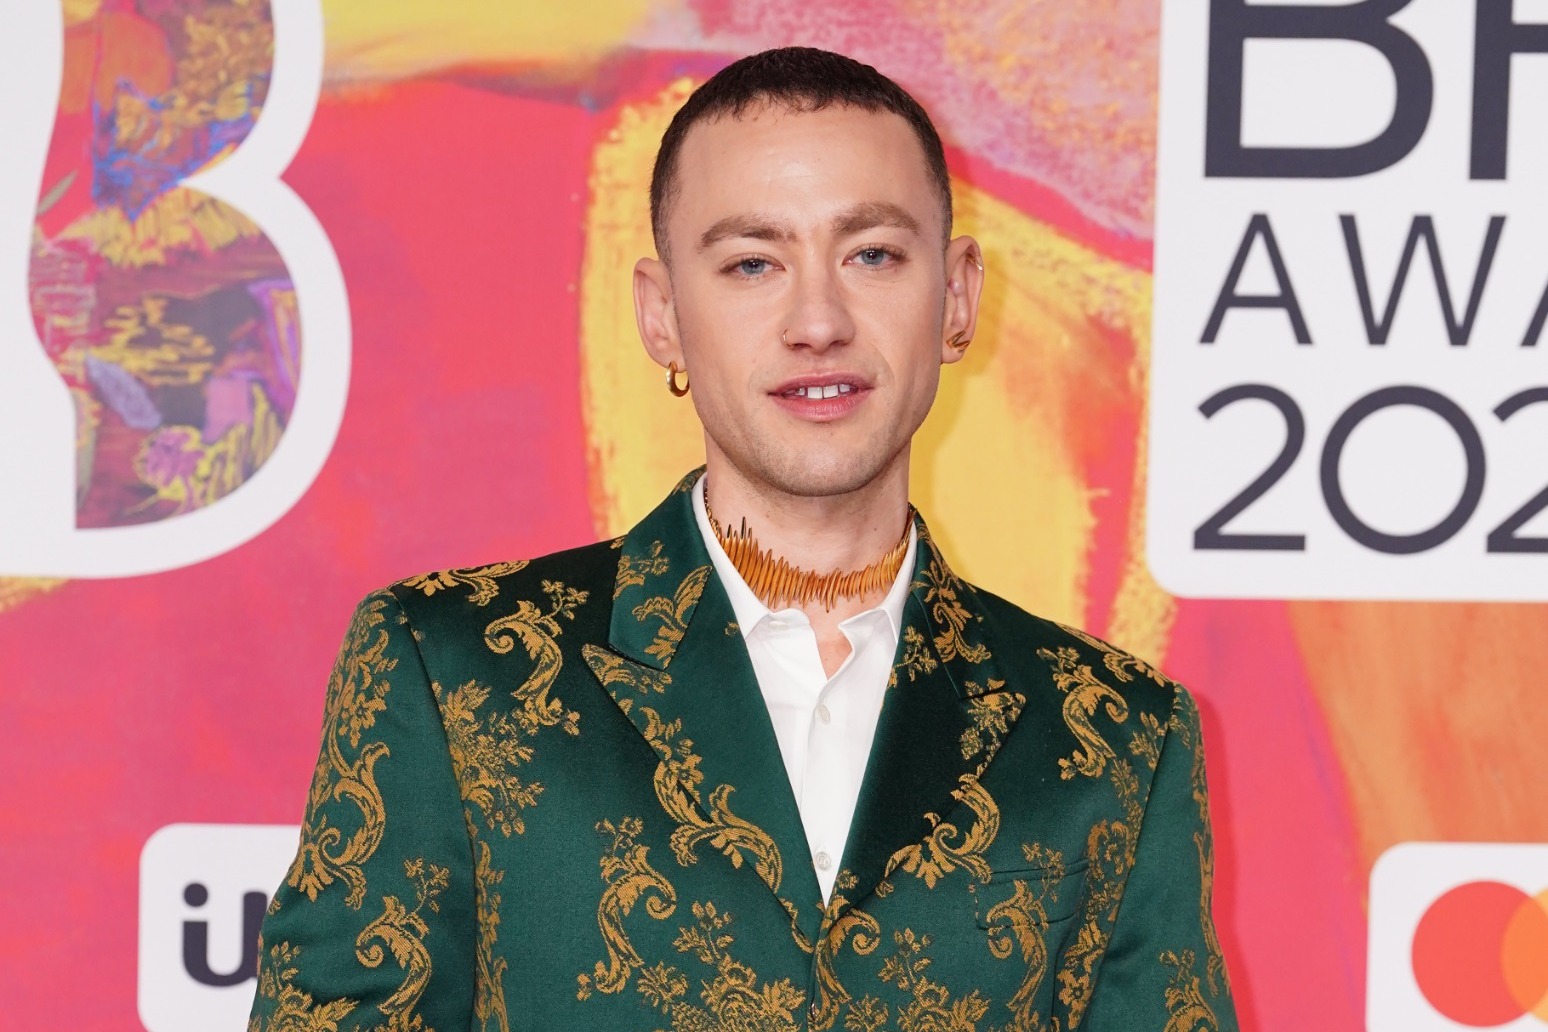 Olly Alexander Israel Eurovision inclusion remarks extreme